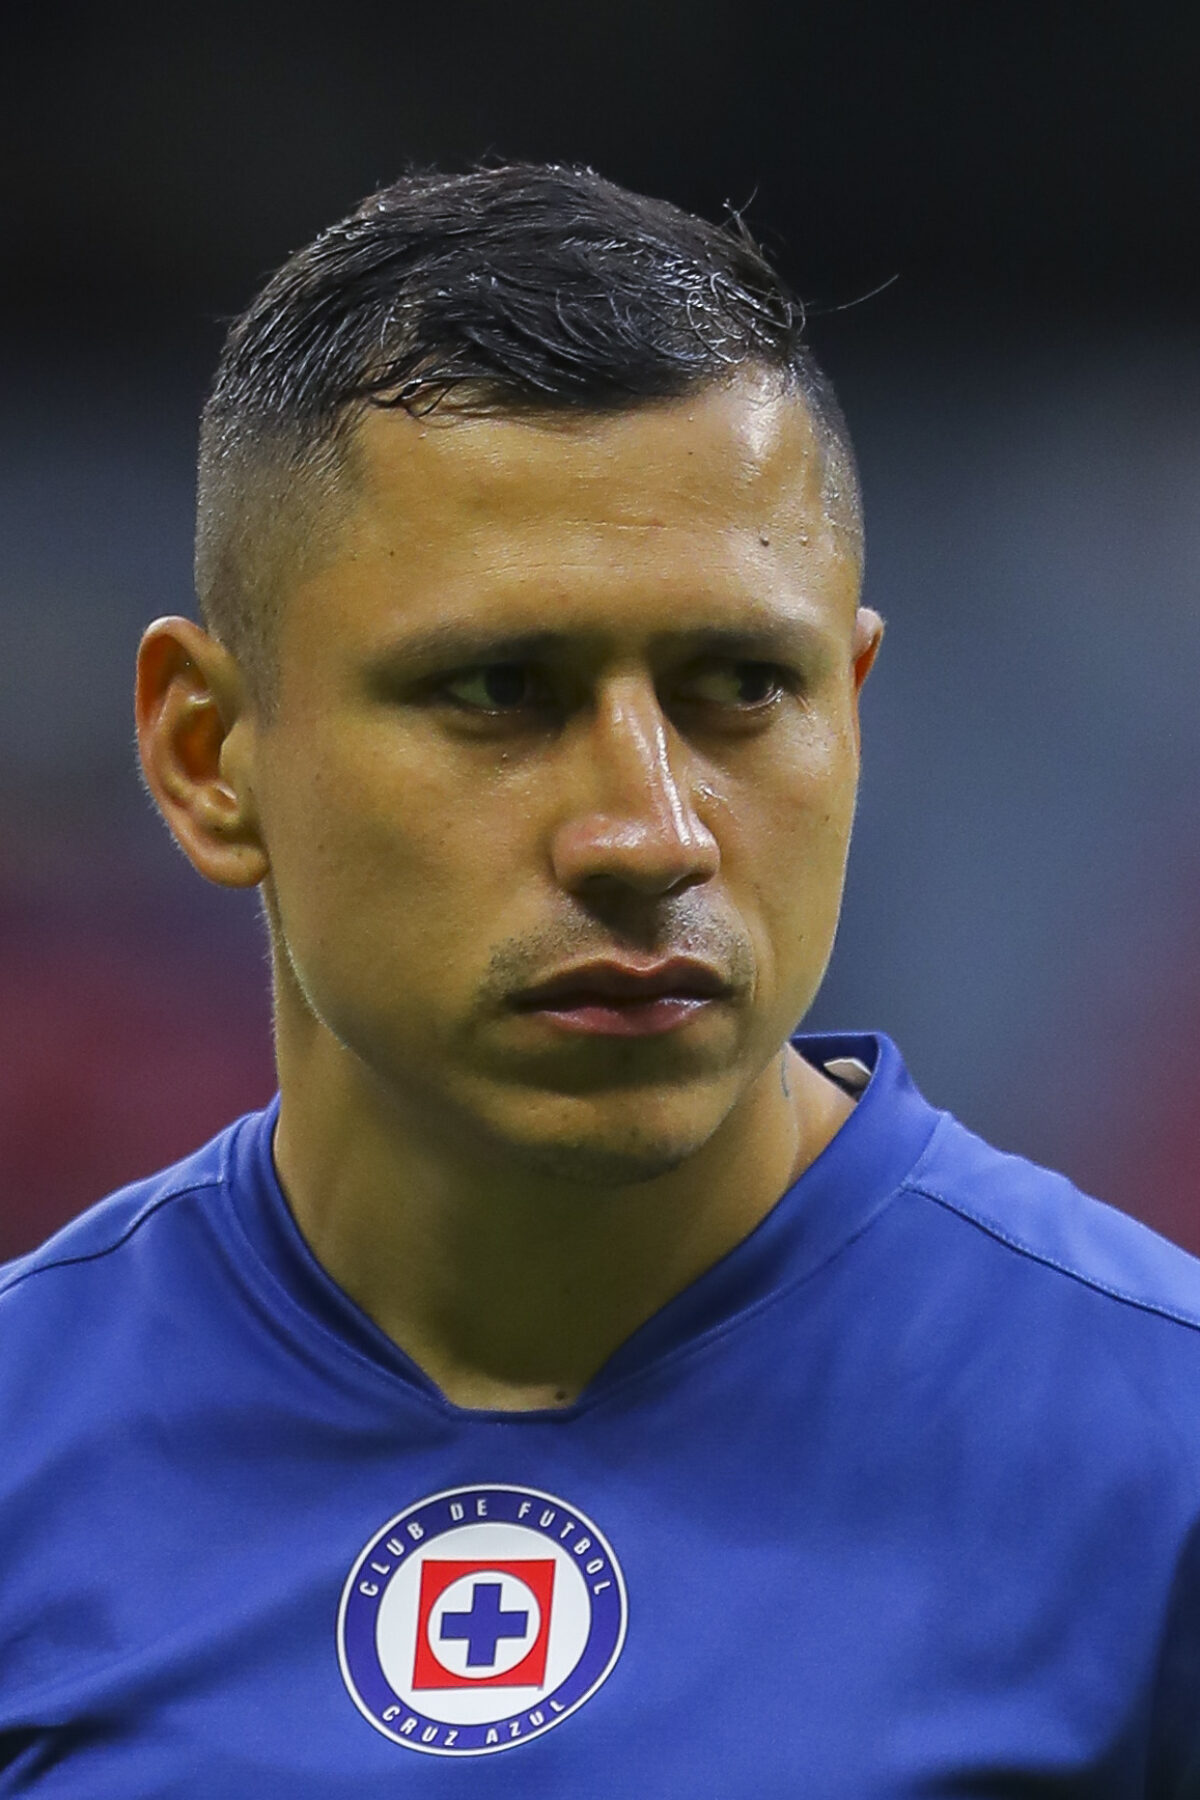 MEXICO CITY, MEXICO - SEPTEMBER 15: Julio César Domínguez of Cruz Azul looks on during the 16th round match between Cruz Azul and Leon as part of the Torneo Apertura 2022 Liga MX at Azteca Stadium on September 15, 2022 in Mexico City, Mexico. (Photo by Agustin Cuevas/Getty Images)